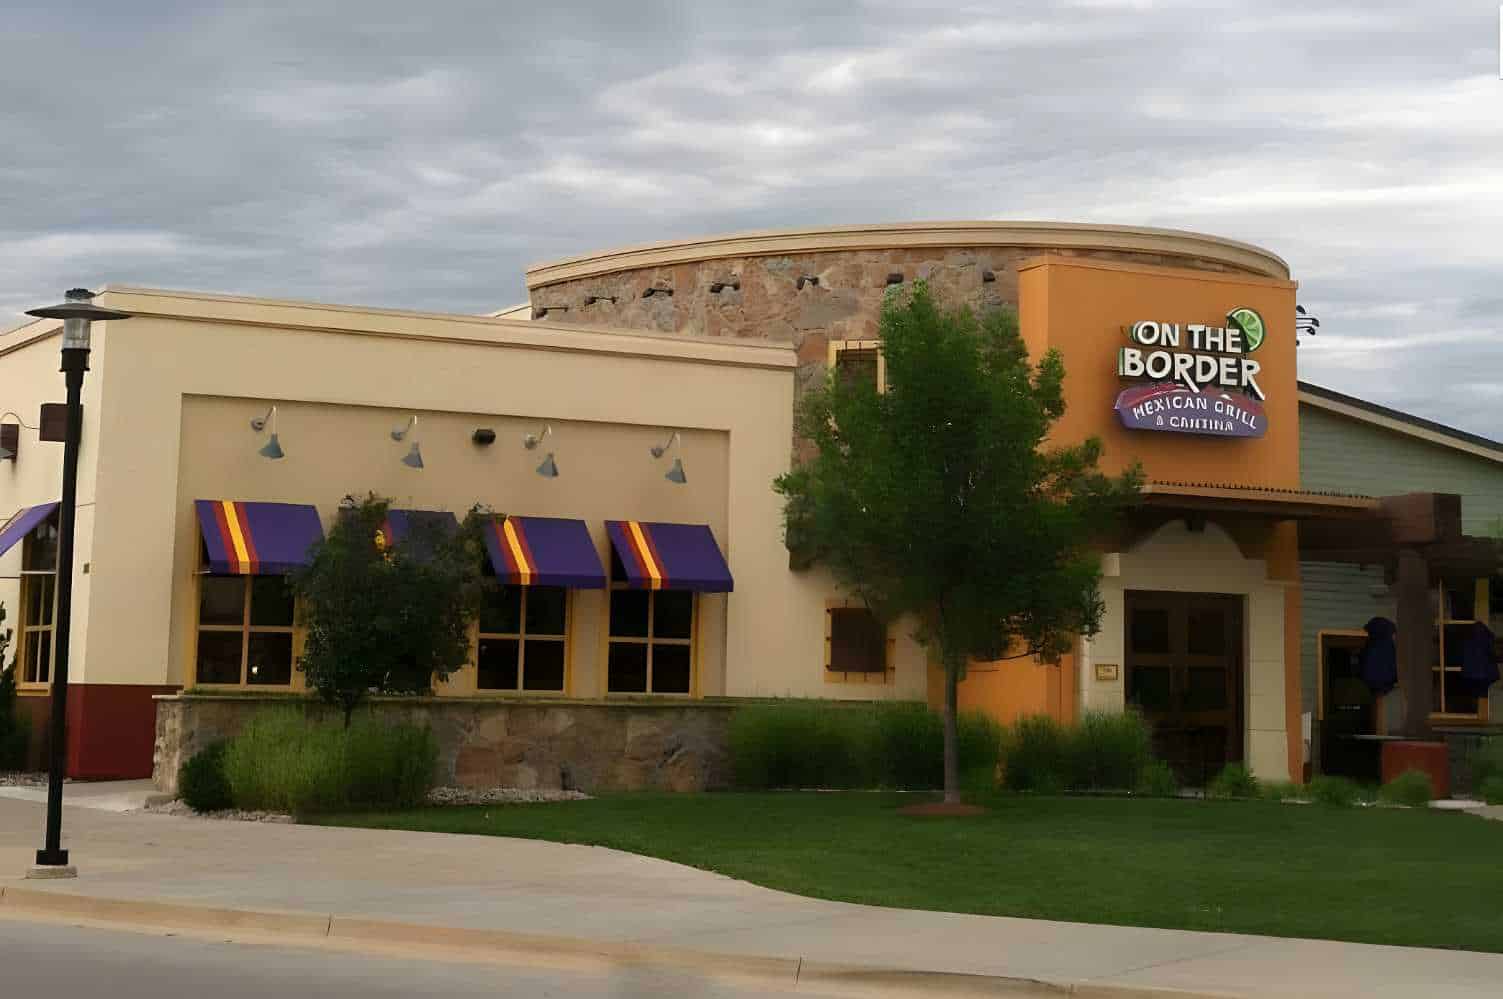 On The Border Mexican Grill & Cantina - Jordan Creek Best Mexican Restaurants in Des Moines, IA